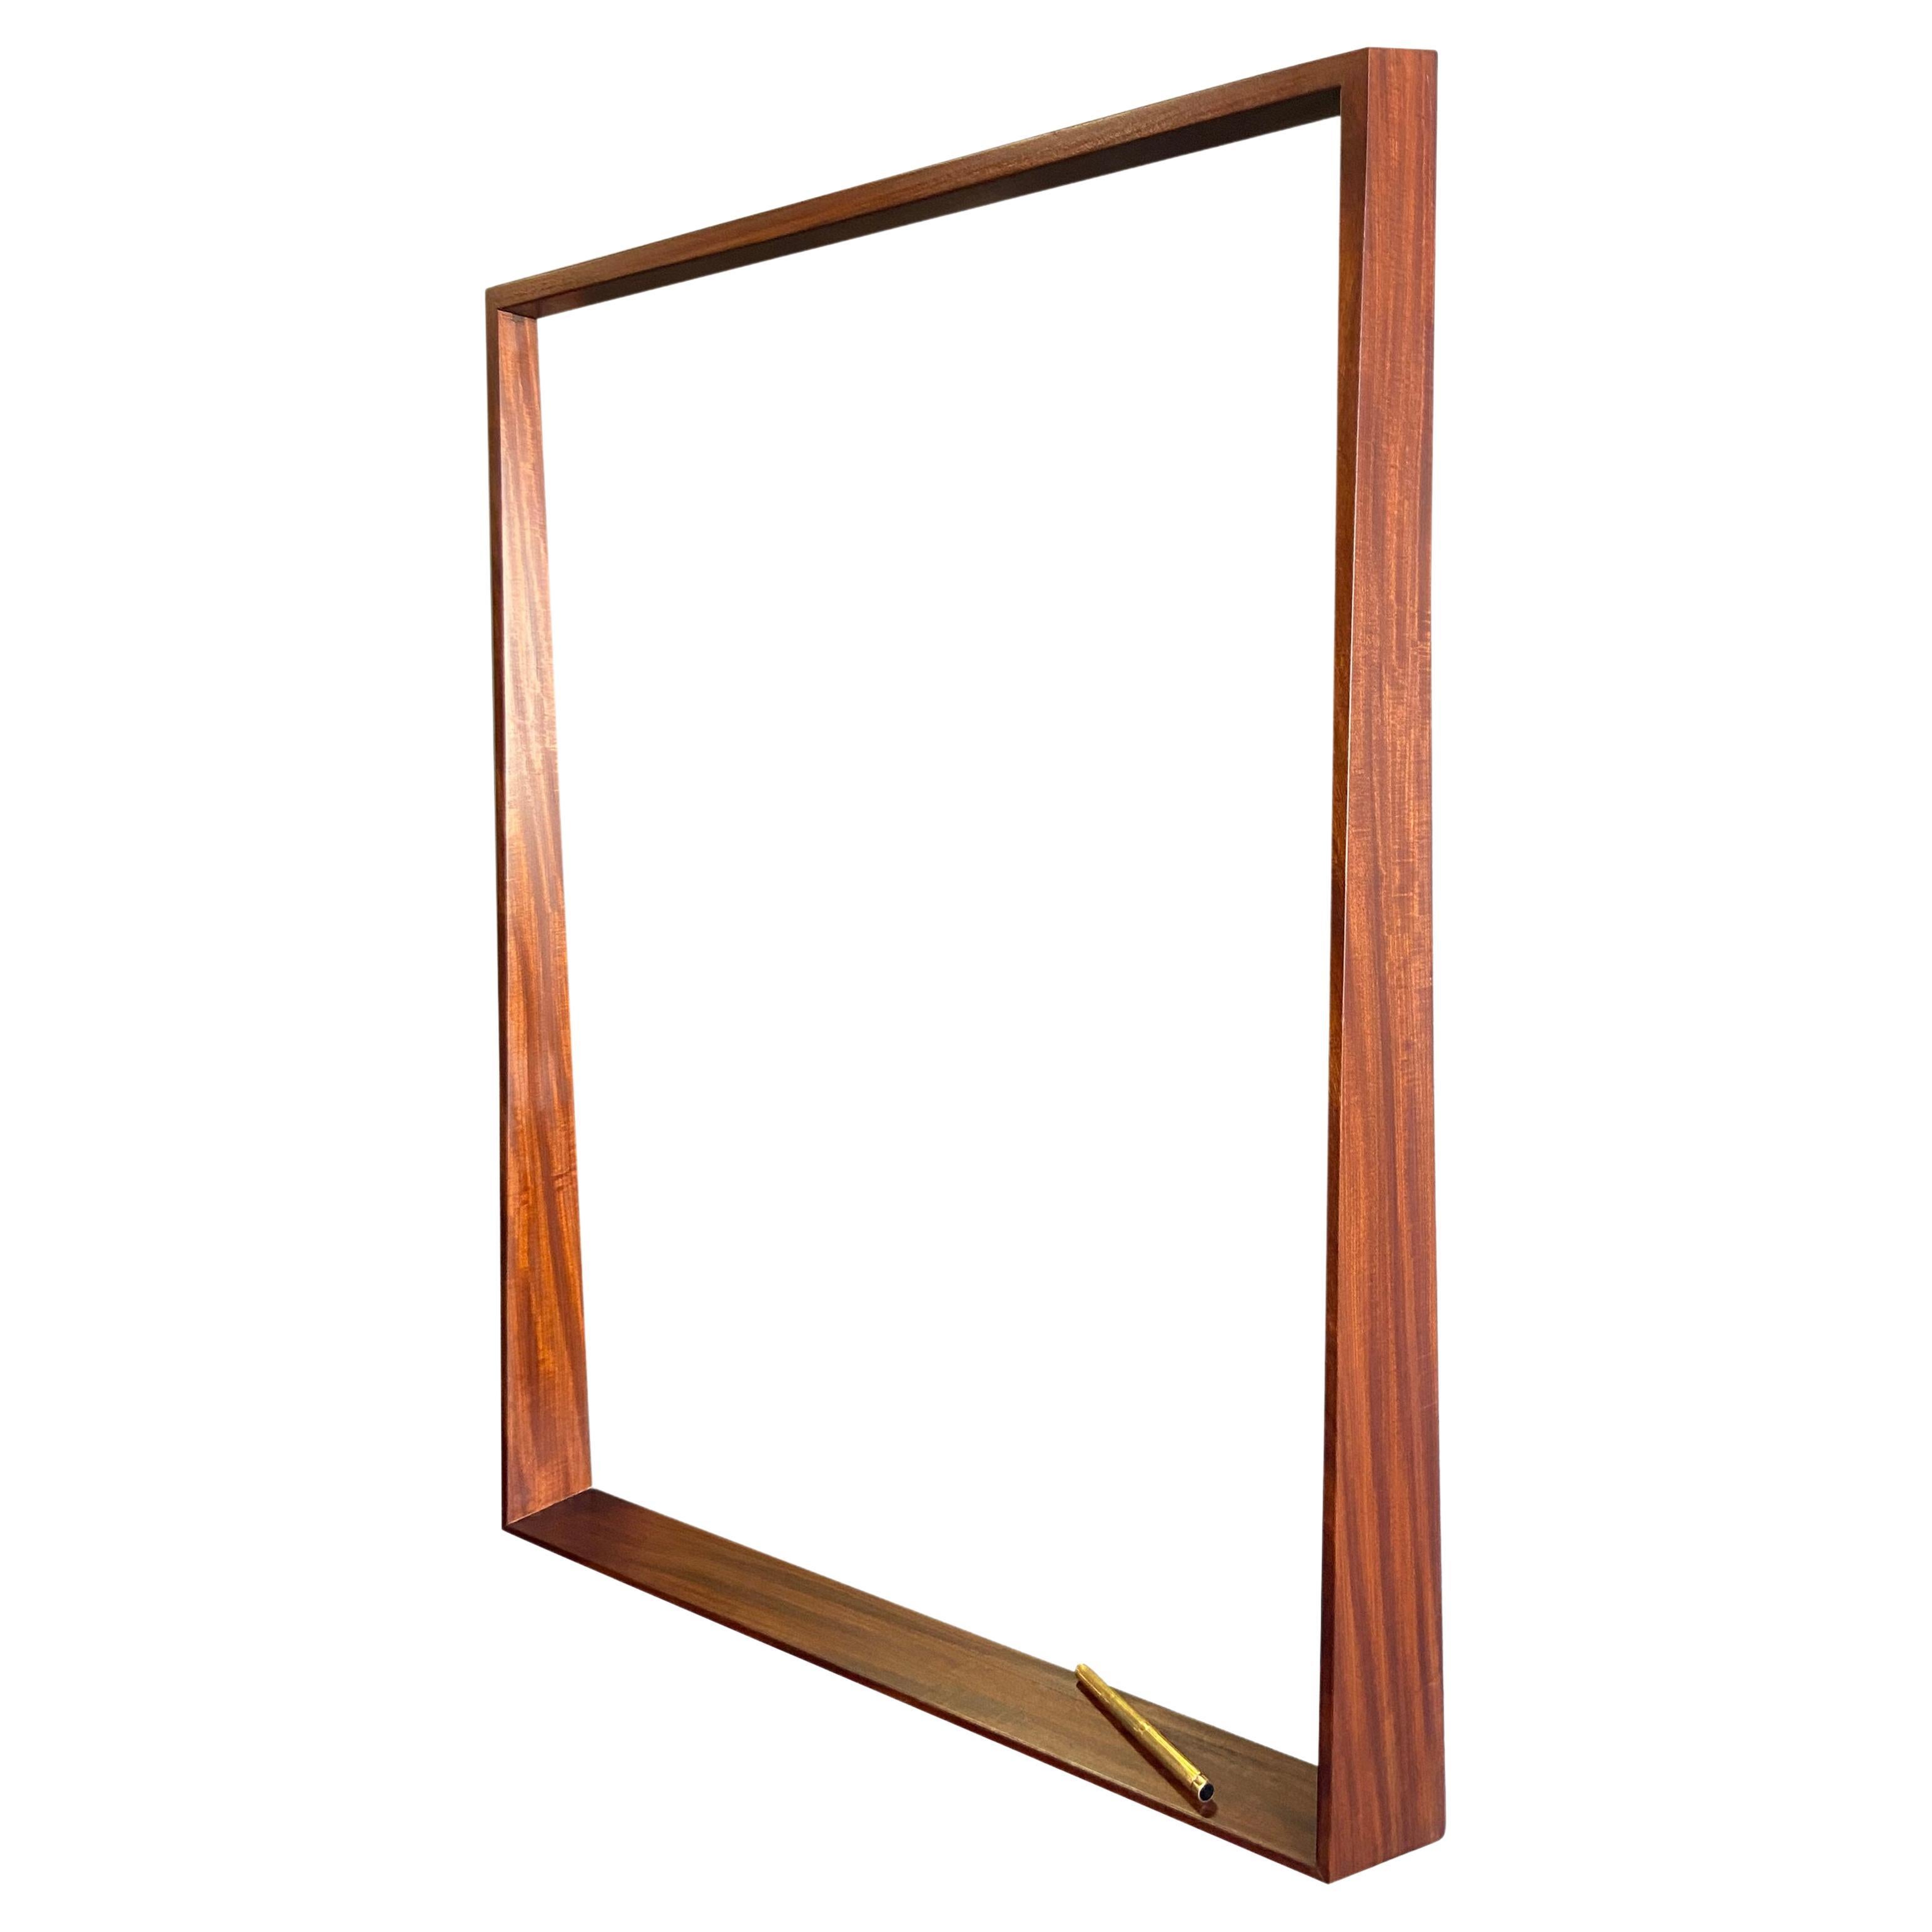 For your consideration is this wonderful black walnut mirror with wonderful grain. Very Intricately designed with tight joinery featuring a bottom ledge and trapezoidal frame having both a minimal yet complex look to it. In the style of modern craft